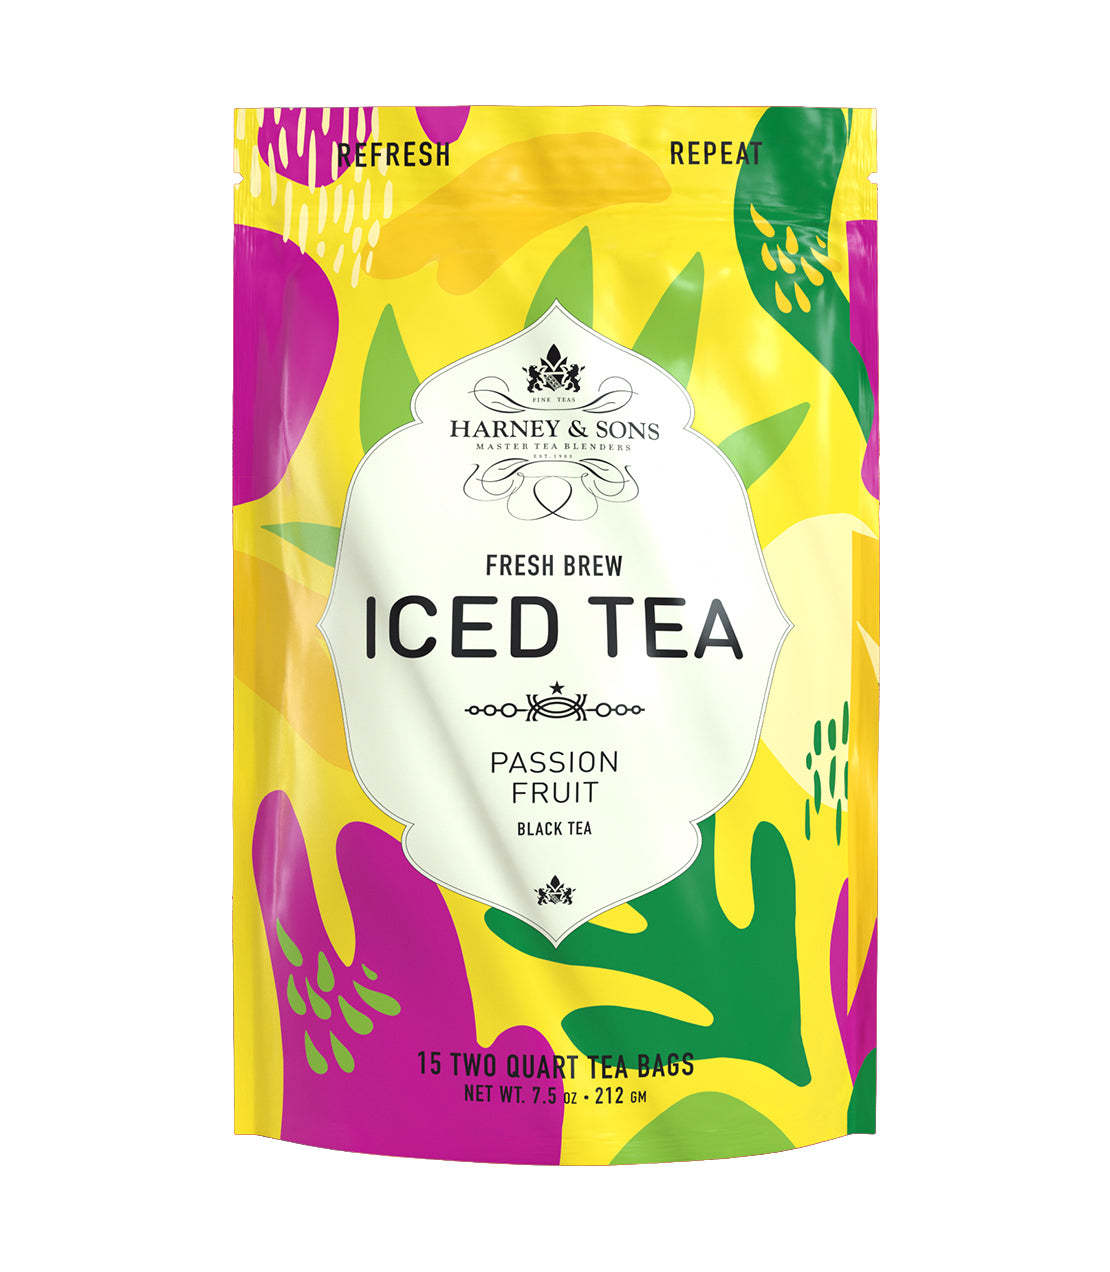 Passion Fruit - Iced Tea Pouches Bag of 15 Pouches - Harney & Sons Fine Teas